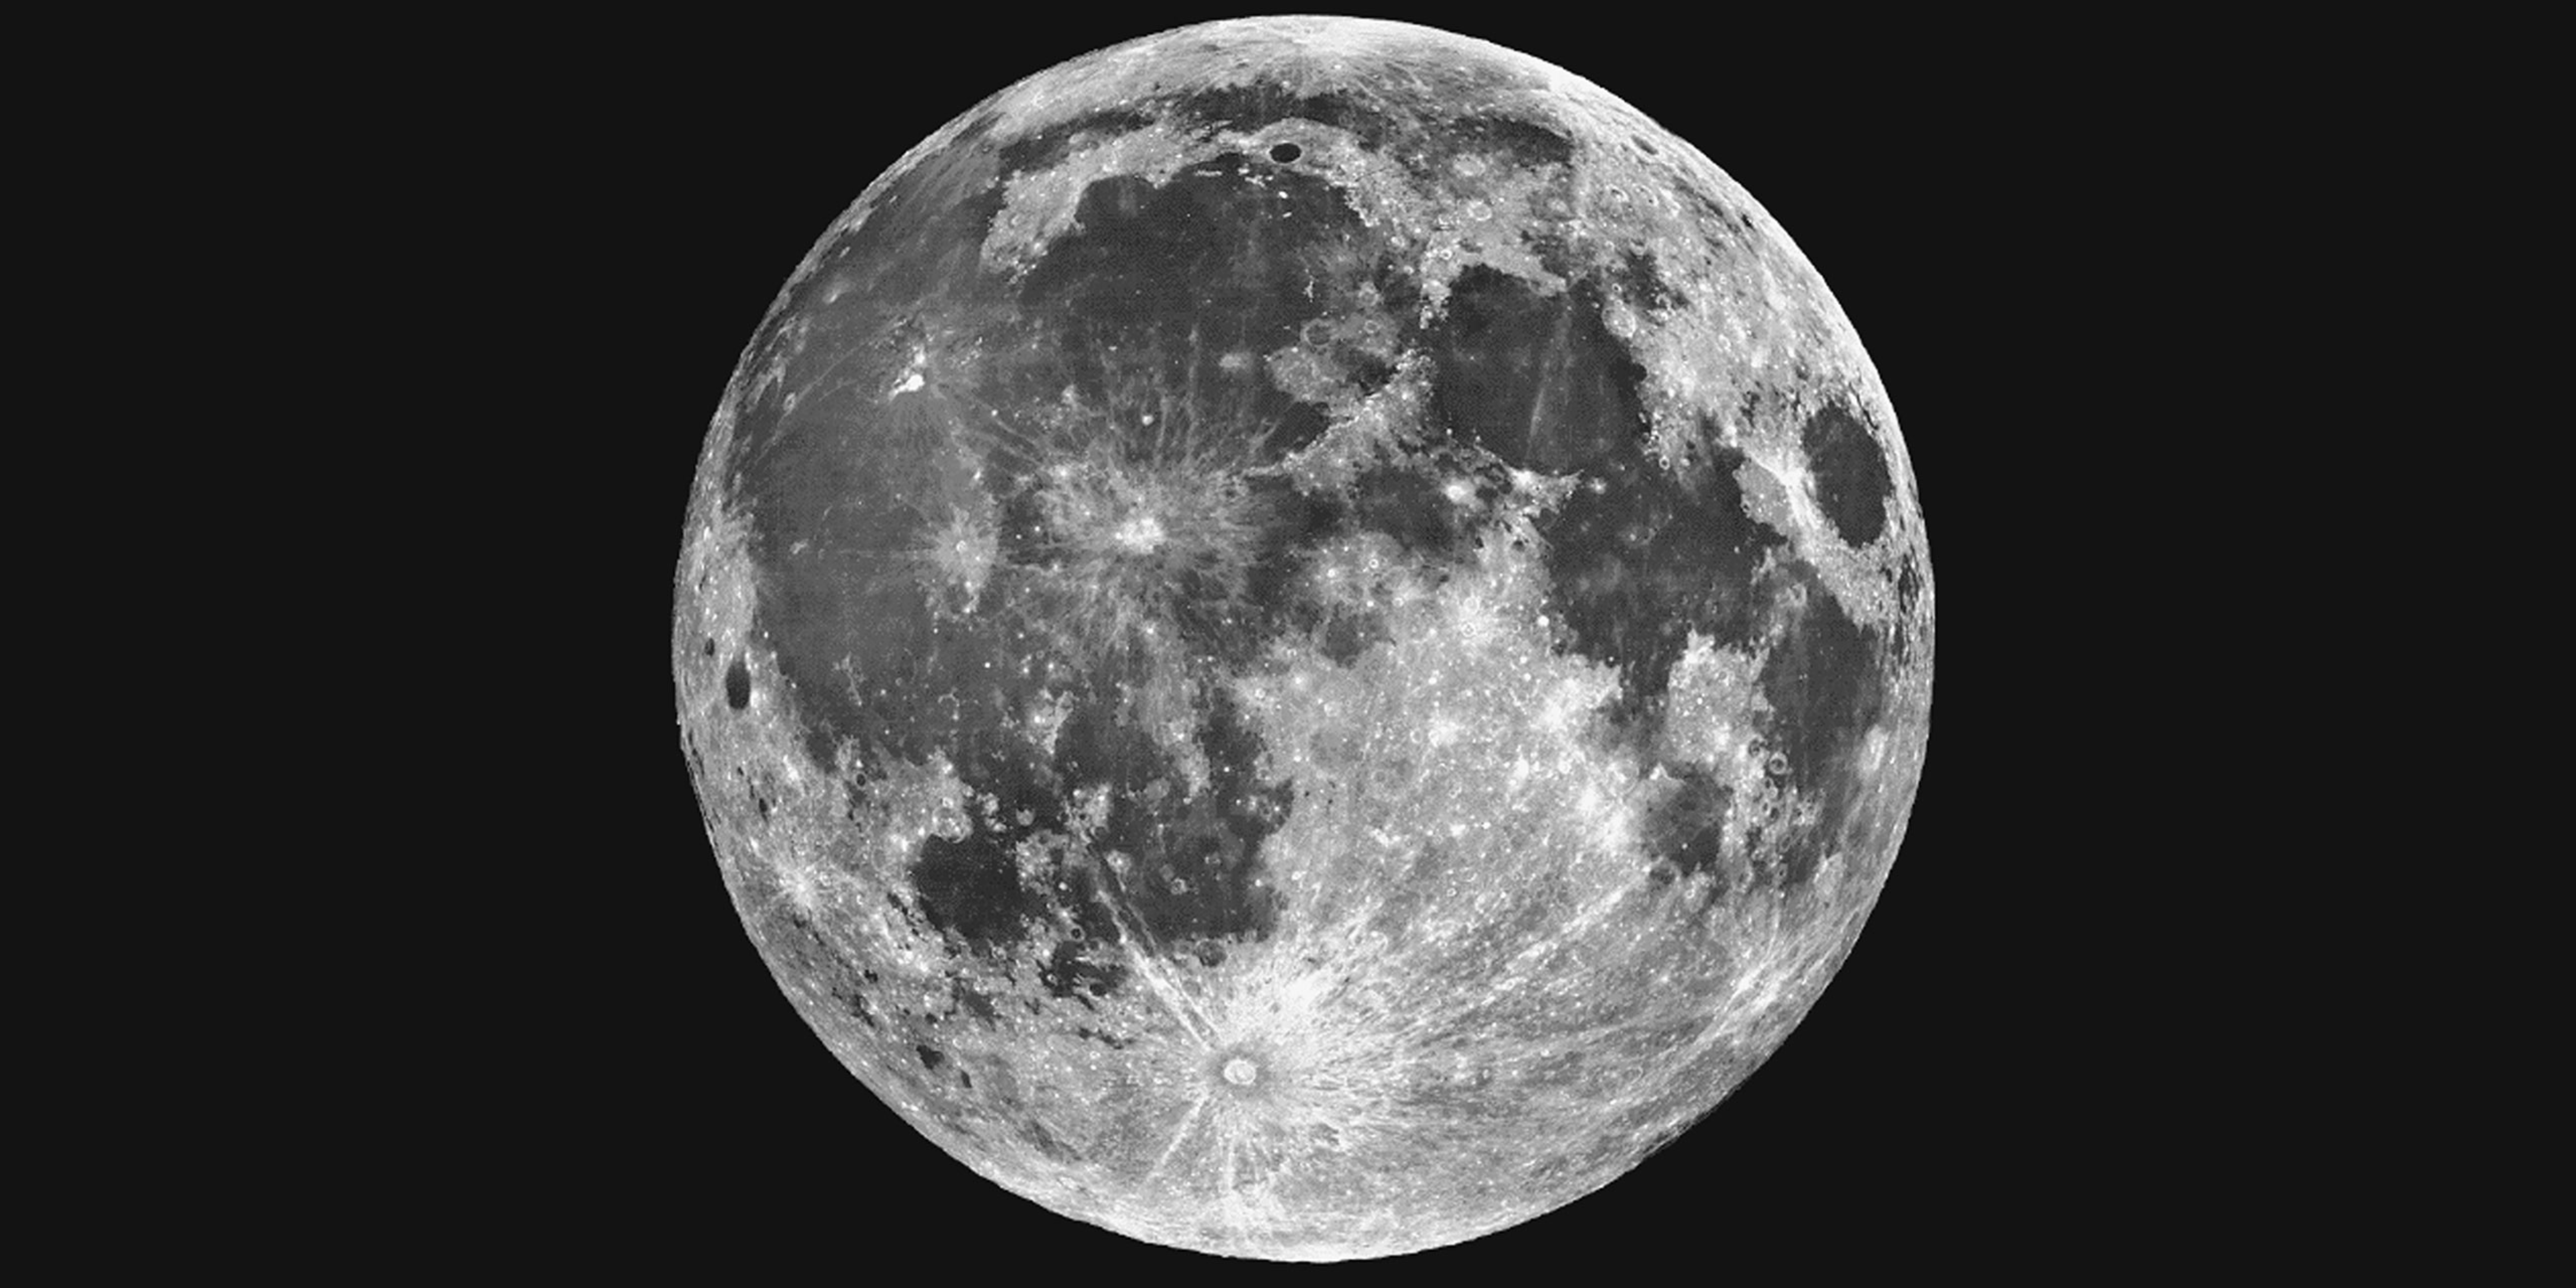 image of a full moon 